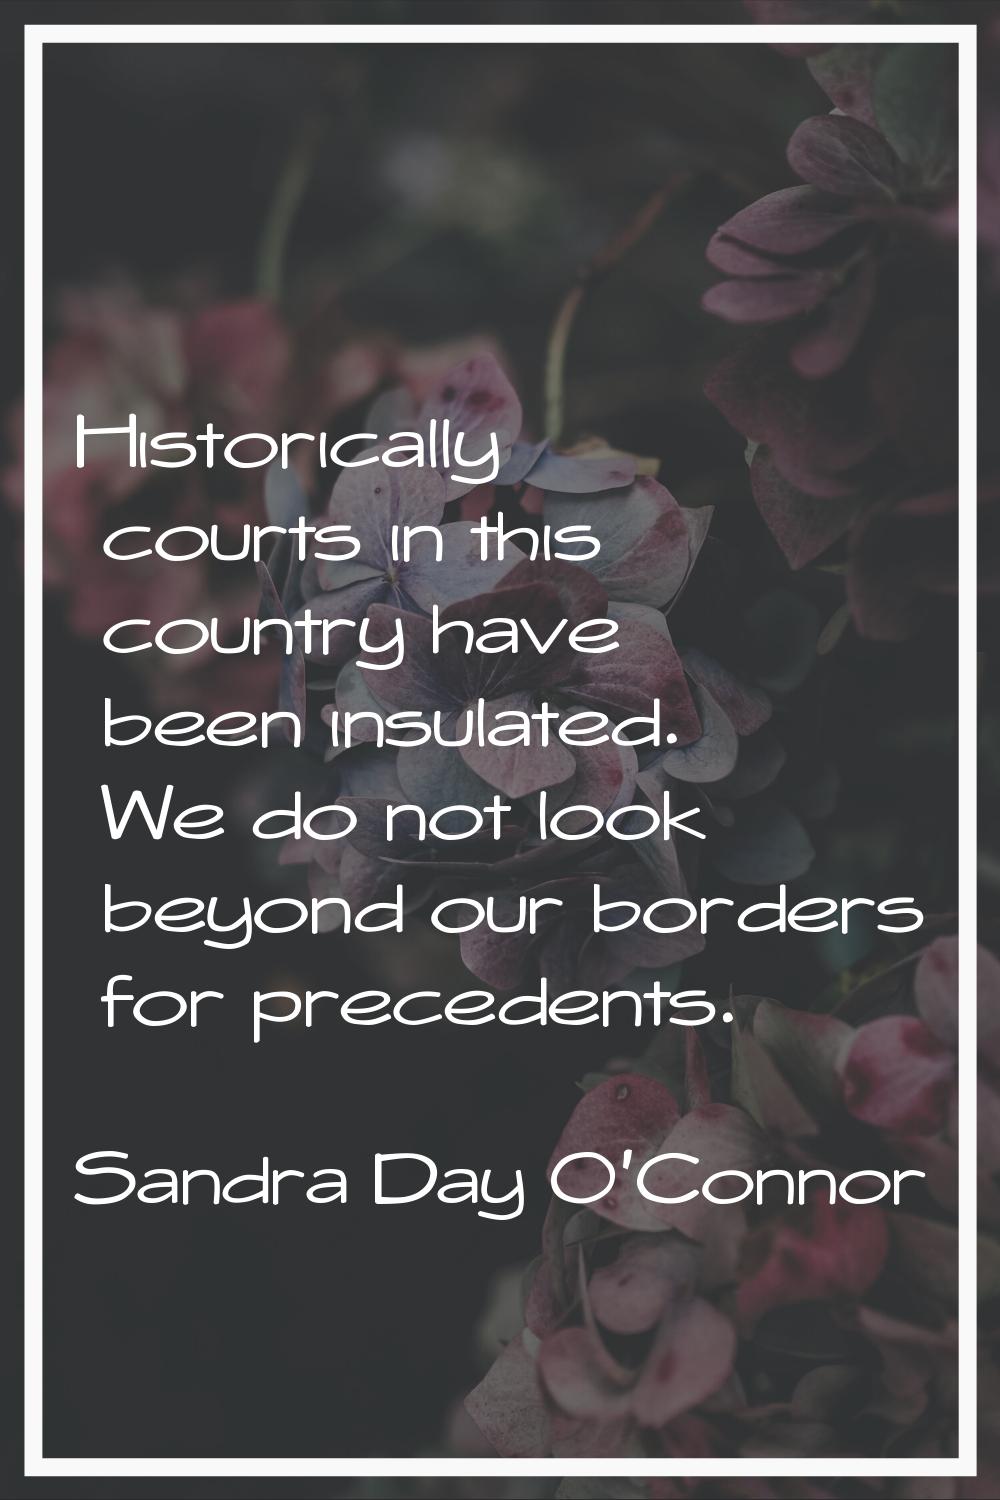 Historically courts in this country have been insulated. We do not look beyond our borders for prec